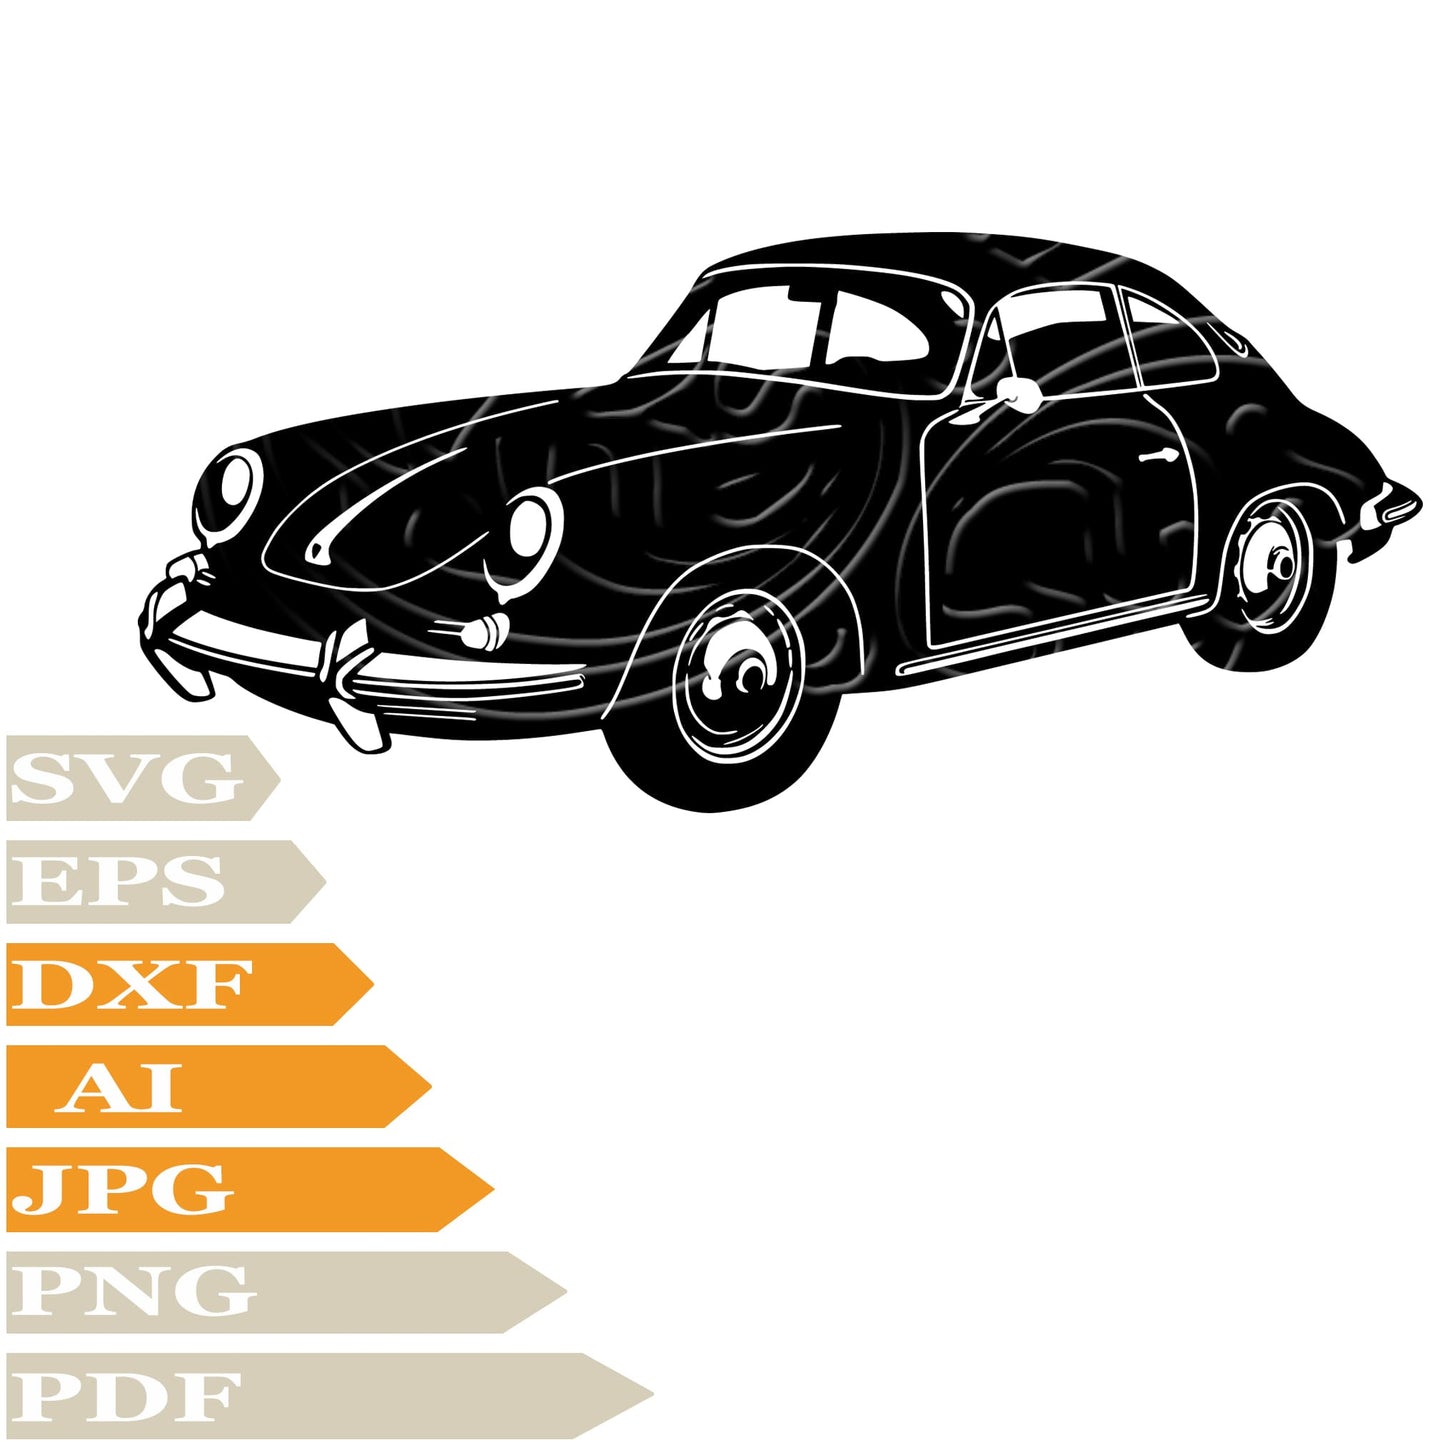 Porshe, Sport Car Porshe 356 Svg File, Image Cut, Png, For Tattoo, Silhouette, Digital Vector Download, Cut File, Clipart, For Cricut